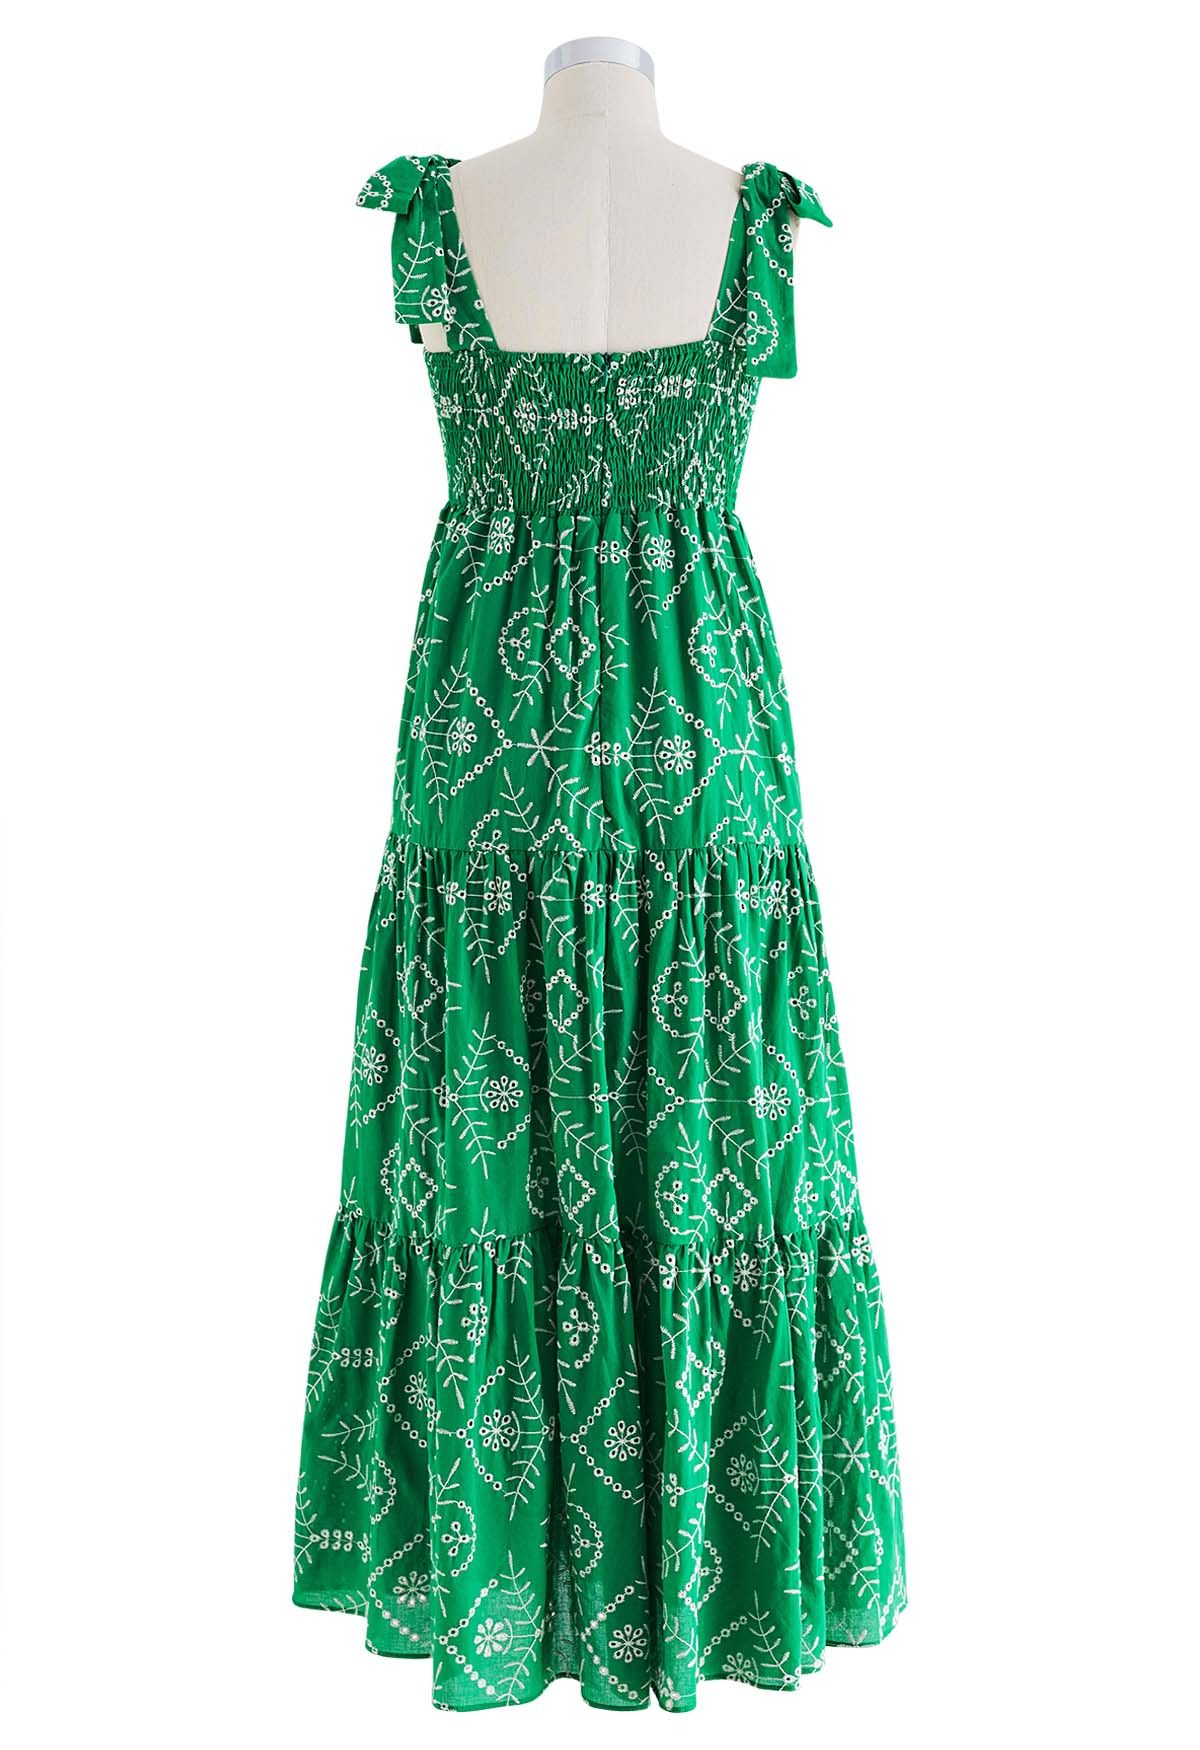 Green Eyelet Embroidered Tie-Strap Maxi Dress - Retro, Indie and Unique ...